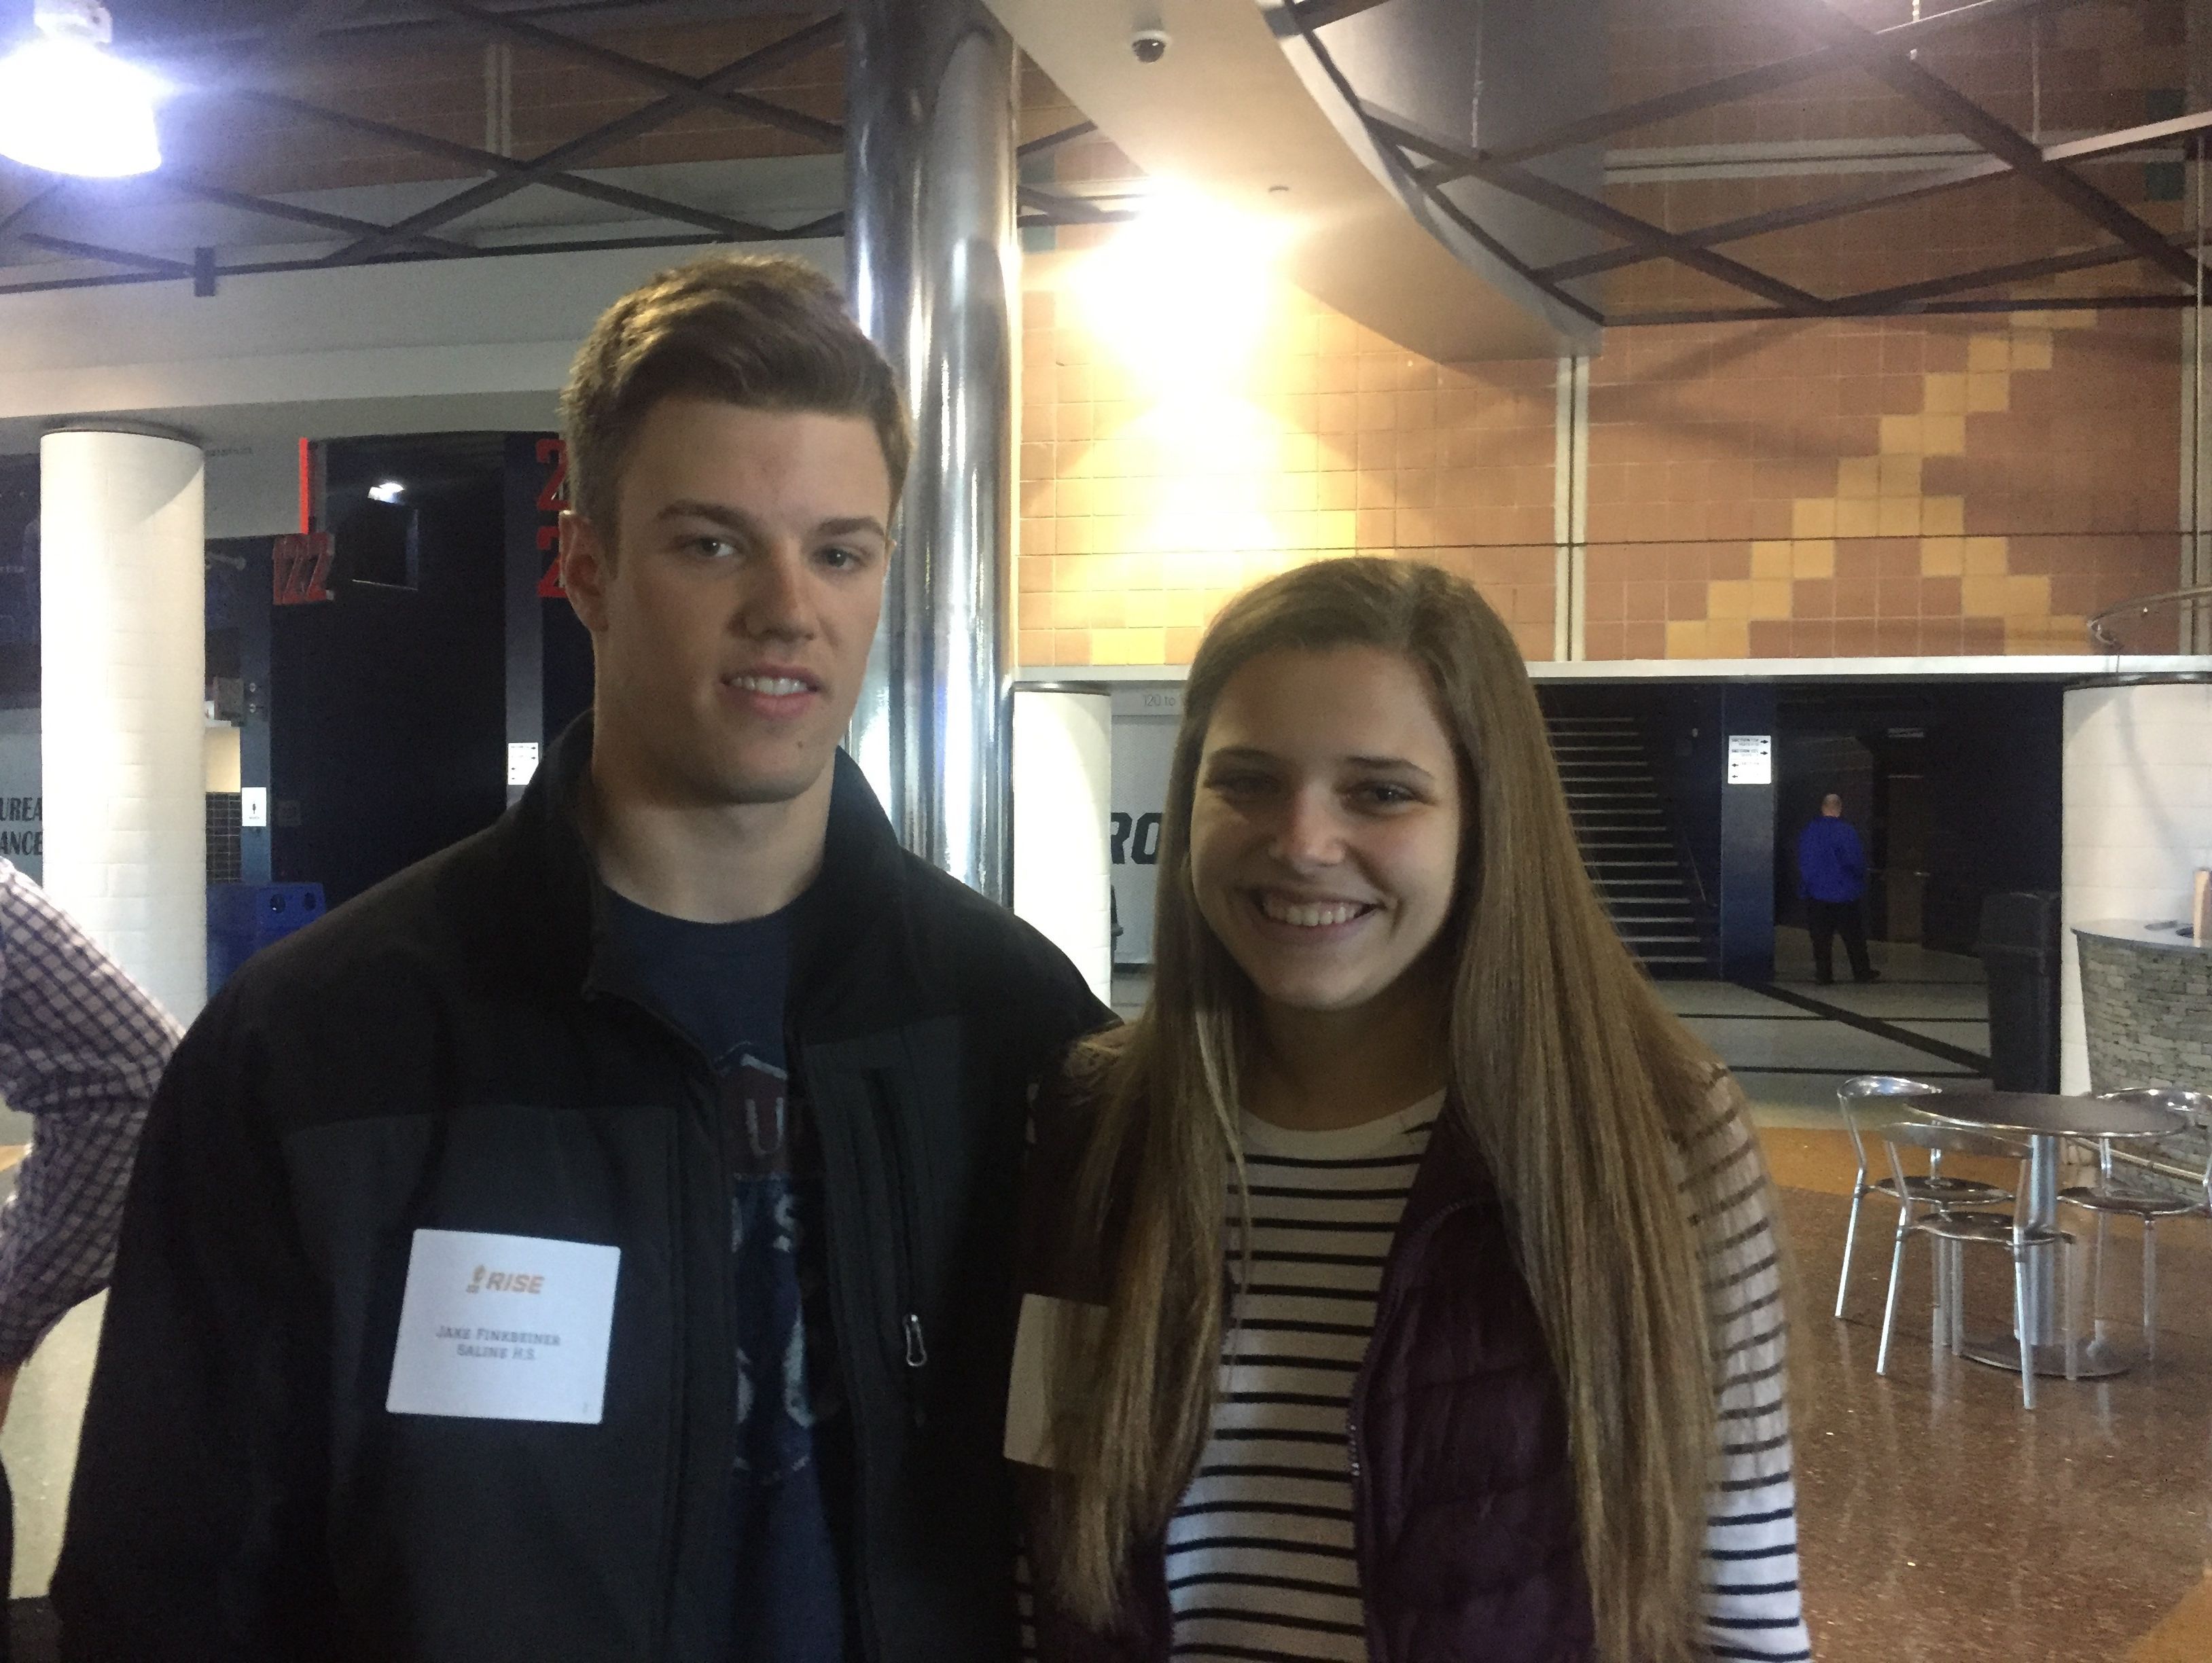 Jake Finkbeiner and Abbey Bowen, both 17, of Saline High School at the RISE program